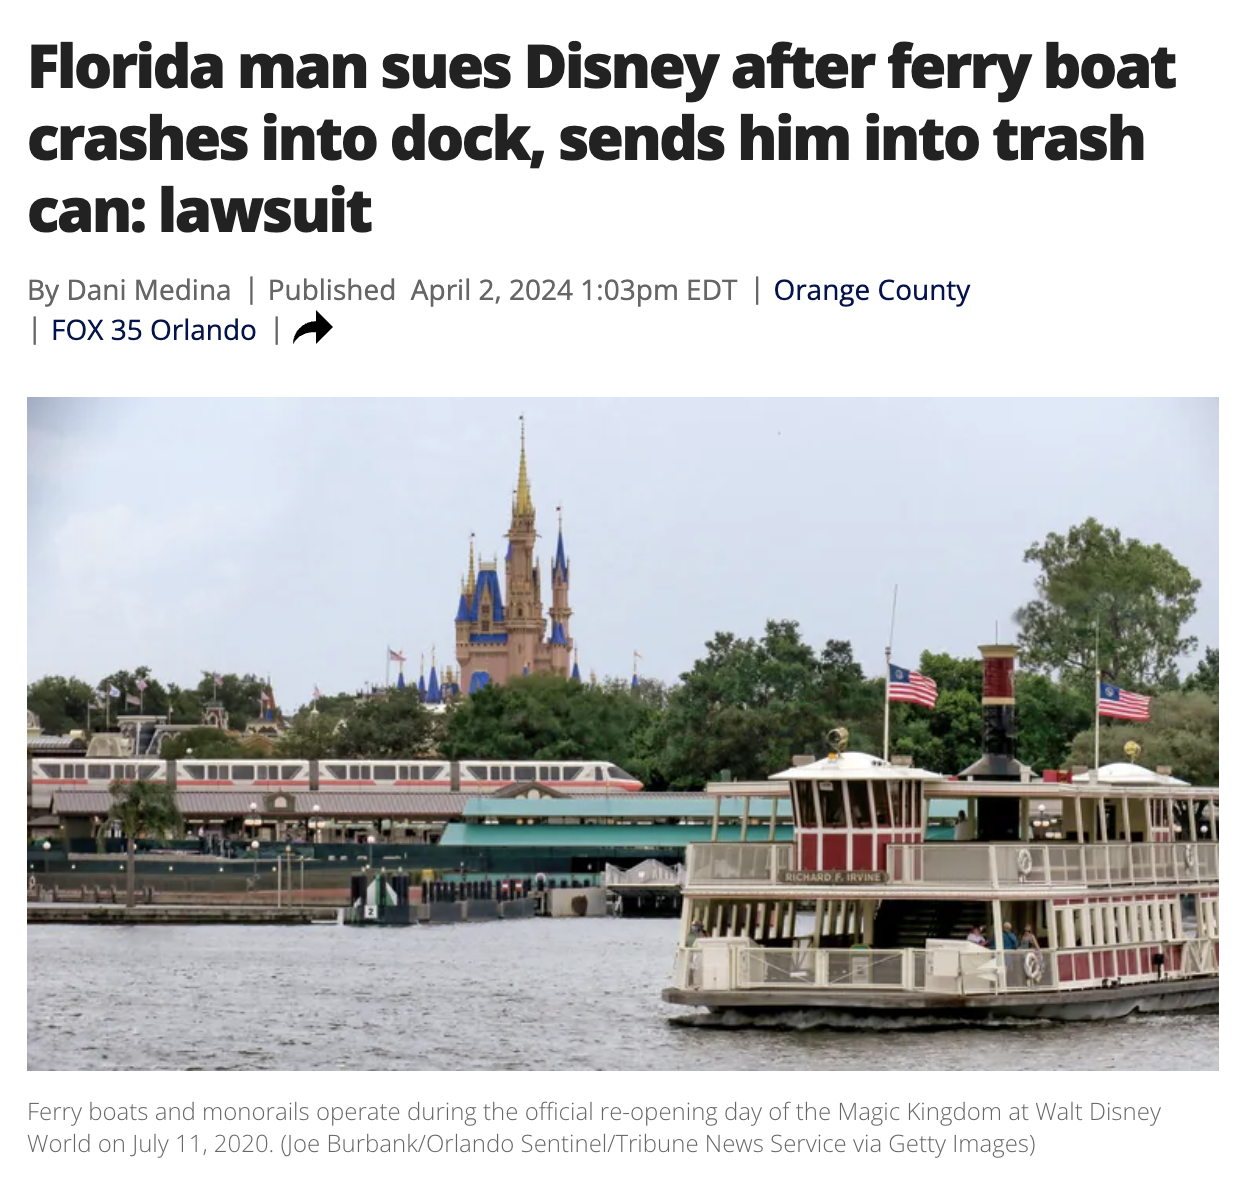 tourist attraction - Florida man sues Disney after ferry boat crashes into dock, sends him into trash can lawsuit By Dani Medina | Published pm Edt | Orange County Fox 35 Orlando, Ferry boats and monorails operate during the official reopening day of the 